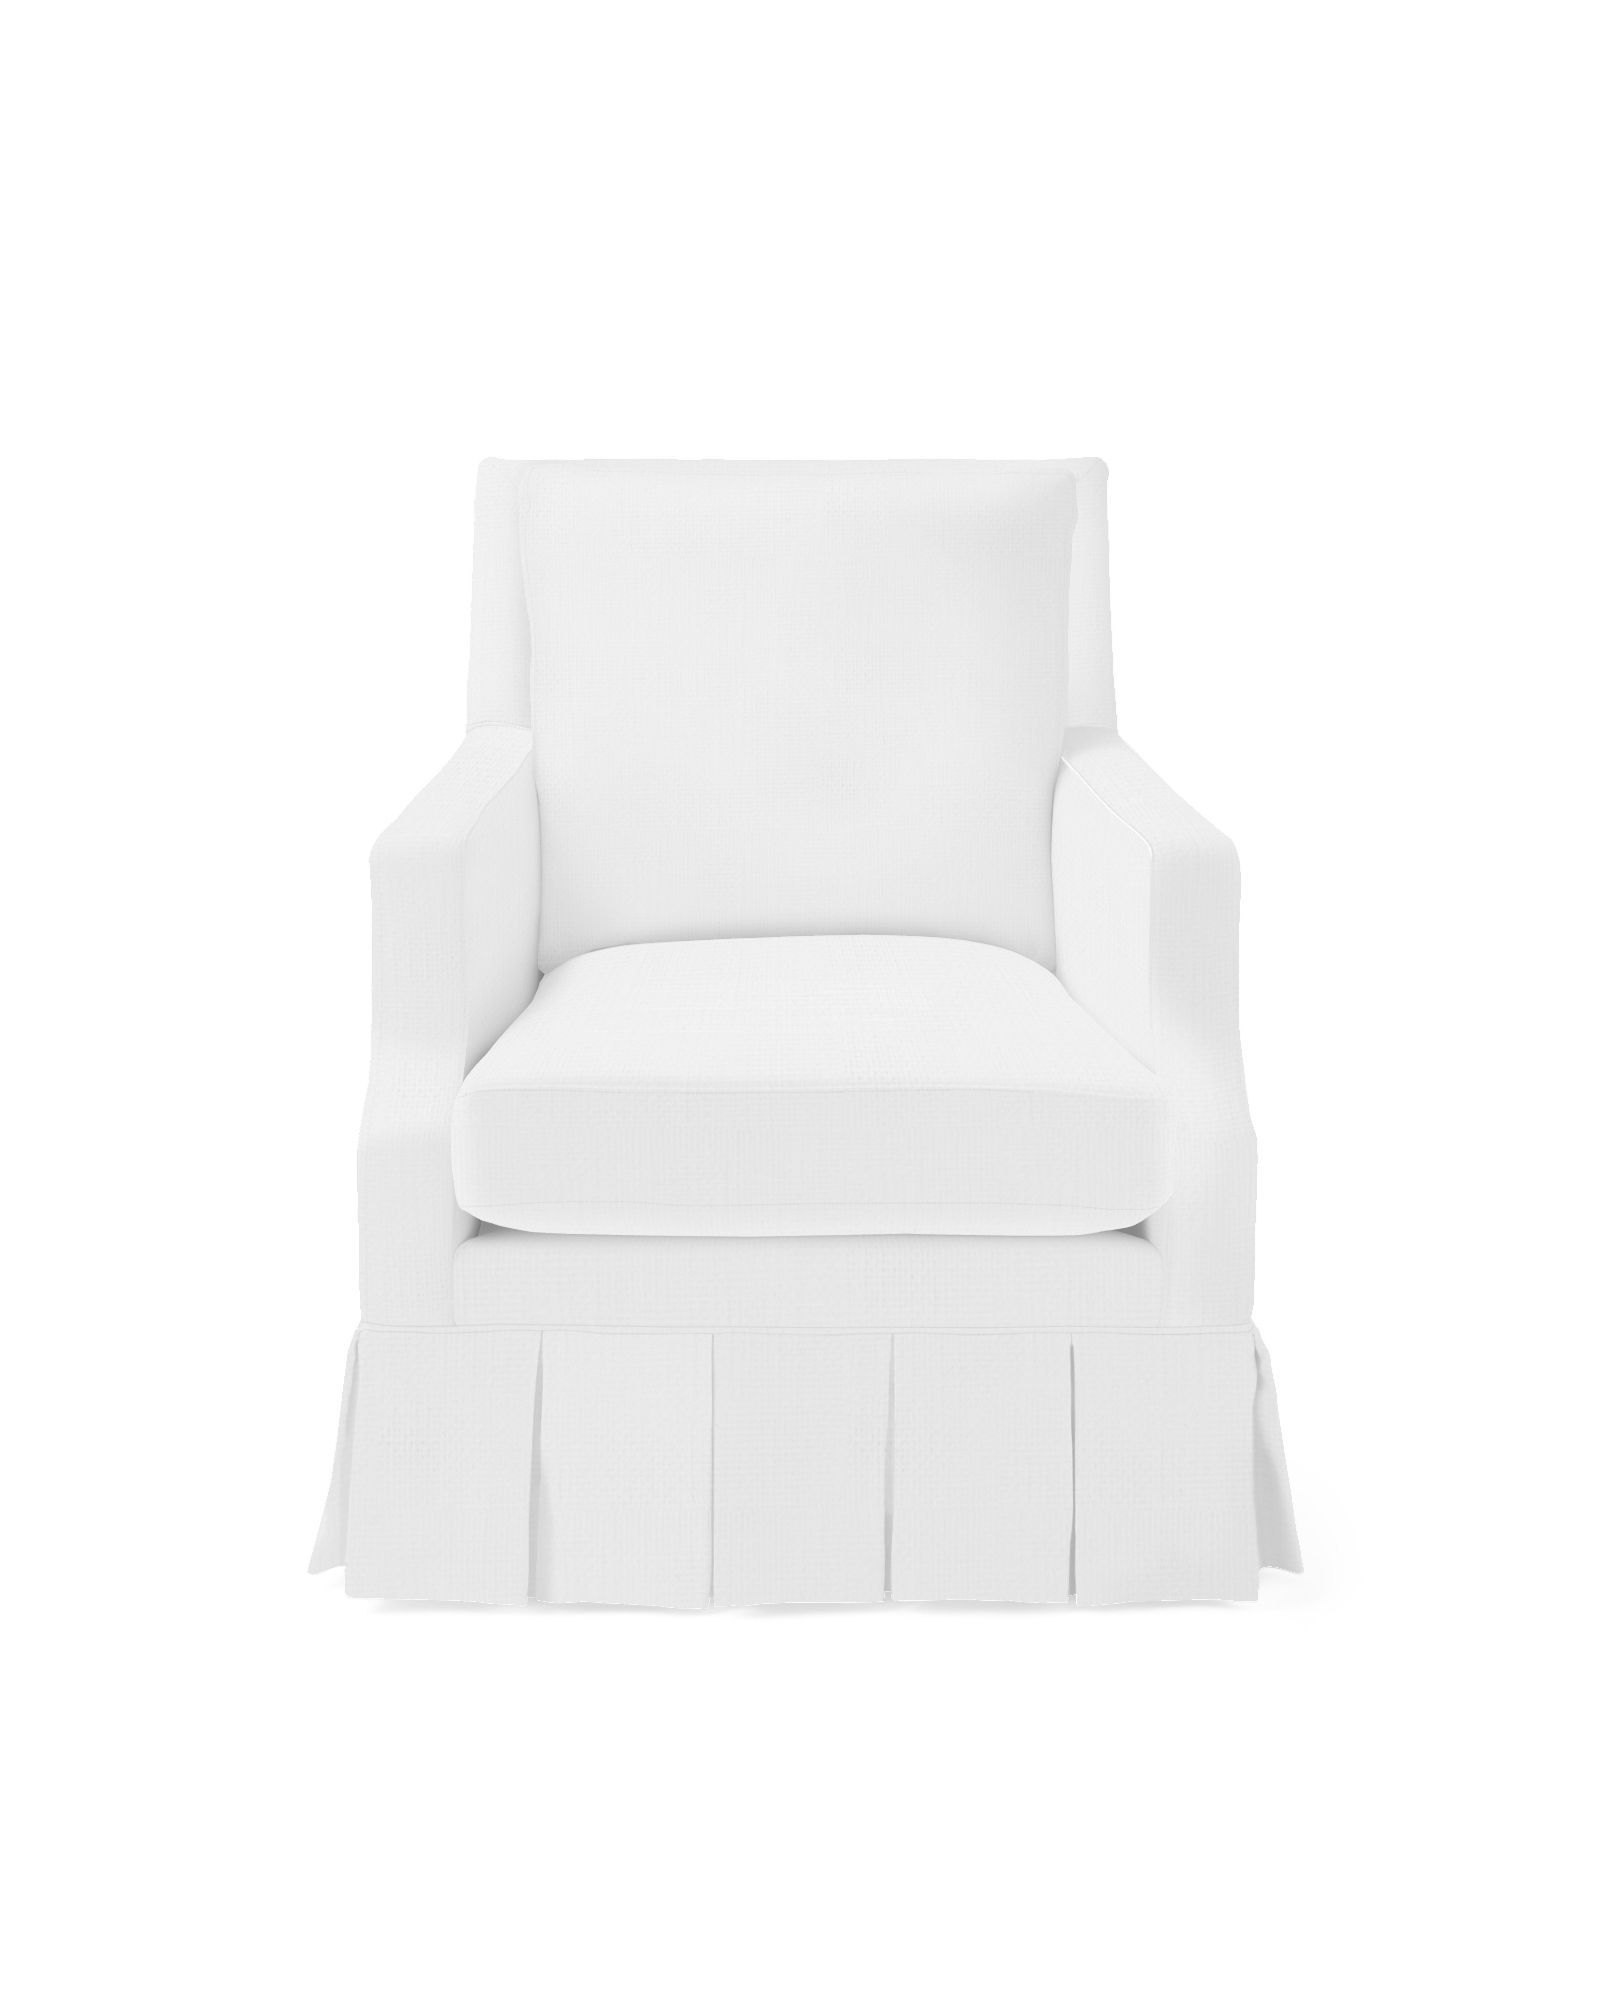 Grady Pleated Swivel Chair | Serena and Lily